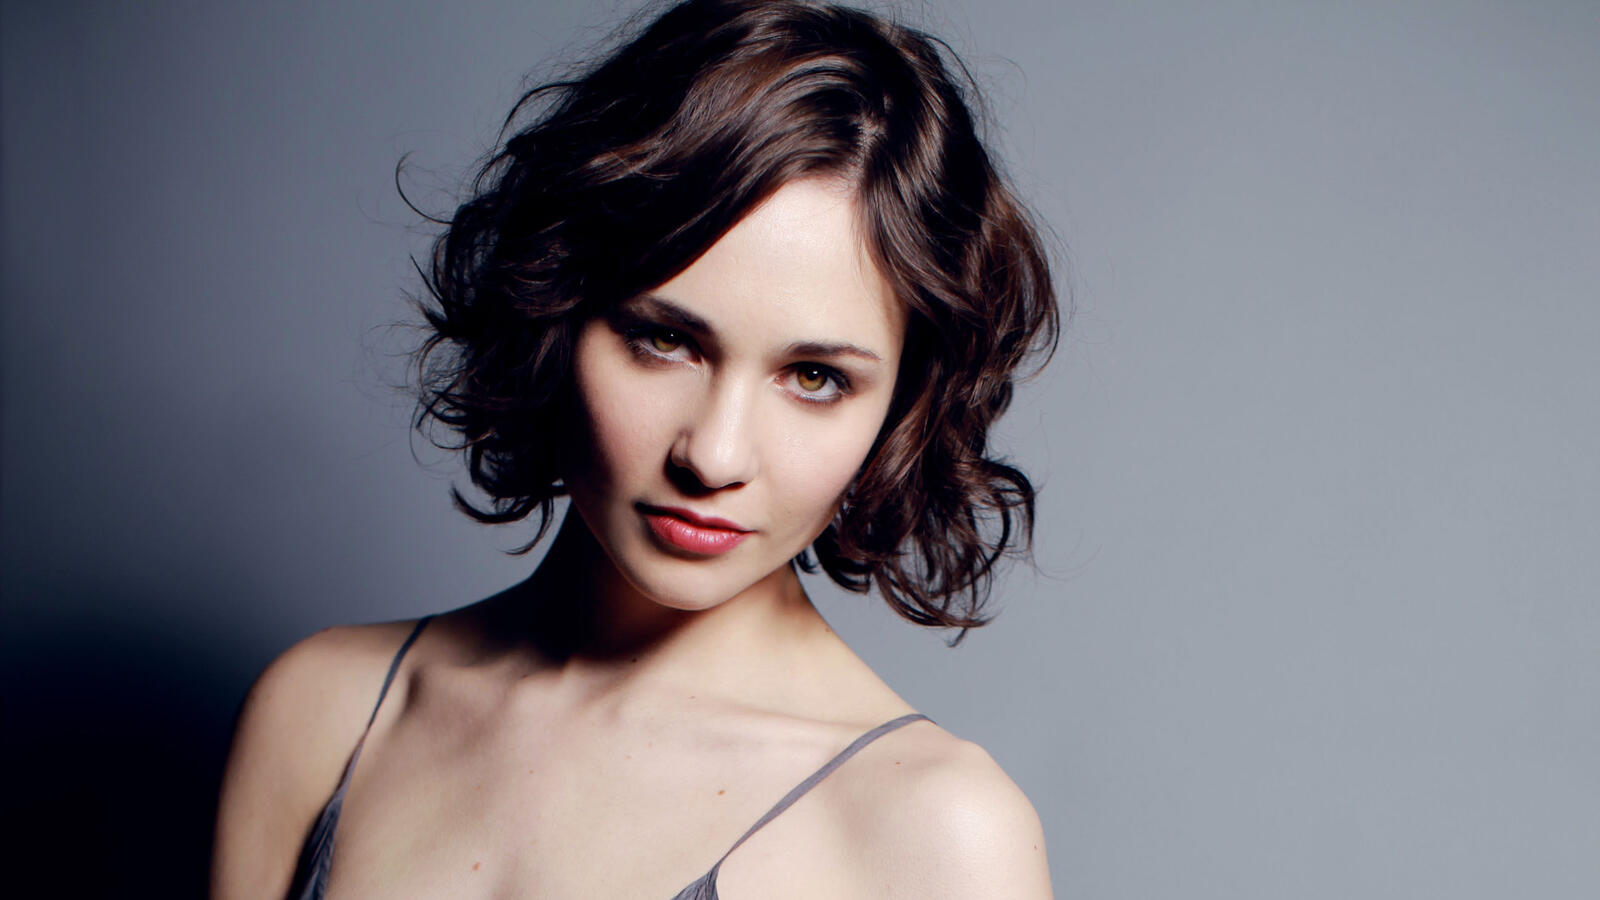 Wallpapers Tuppence Middleton haircut celebrities on the desktop